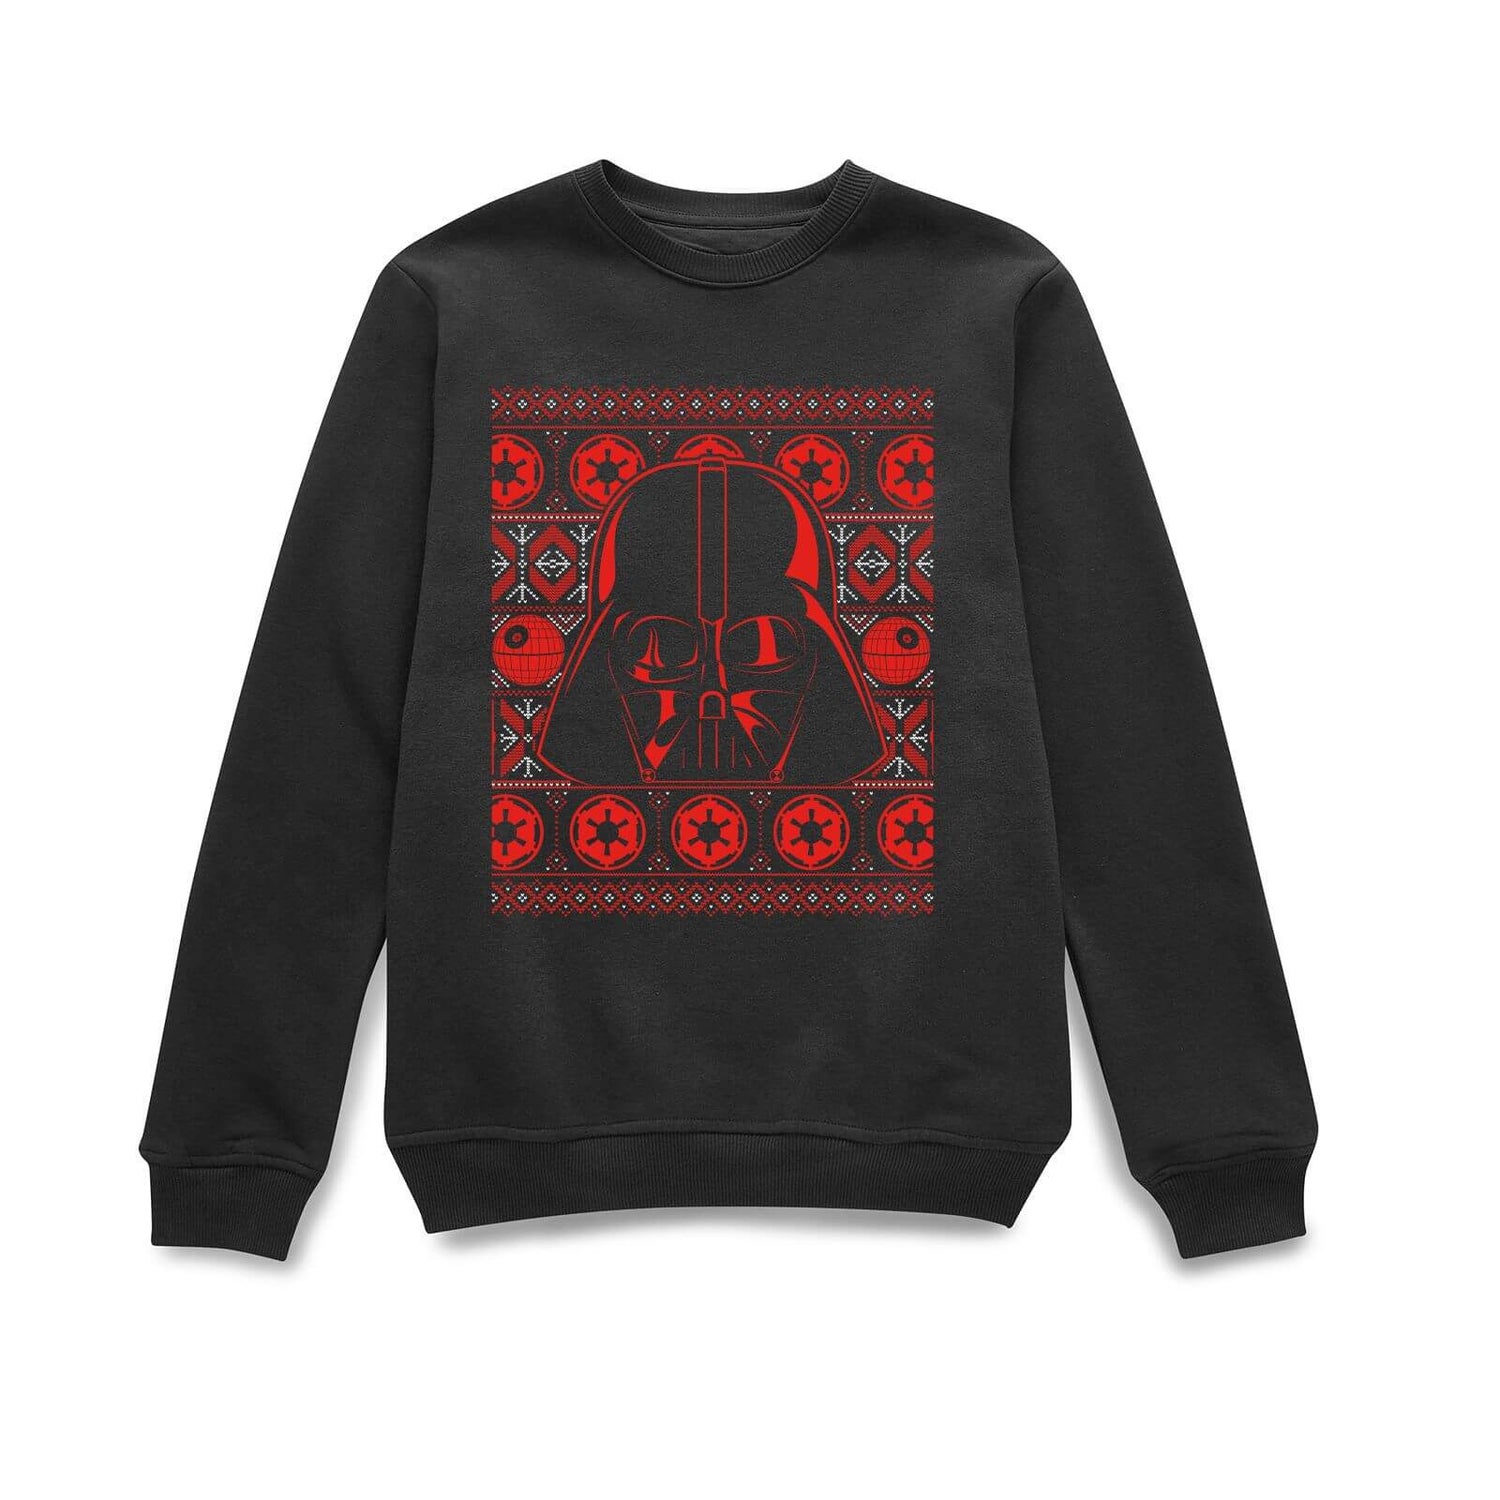 Star Wars For The Empire Christmas Jumper - Black